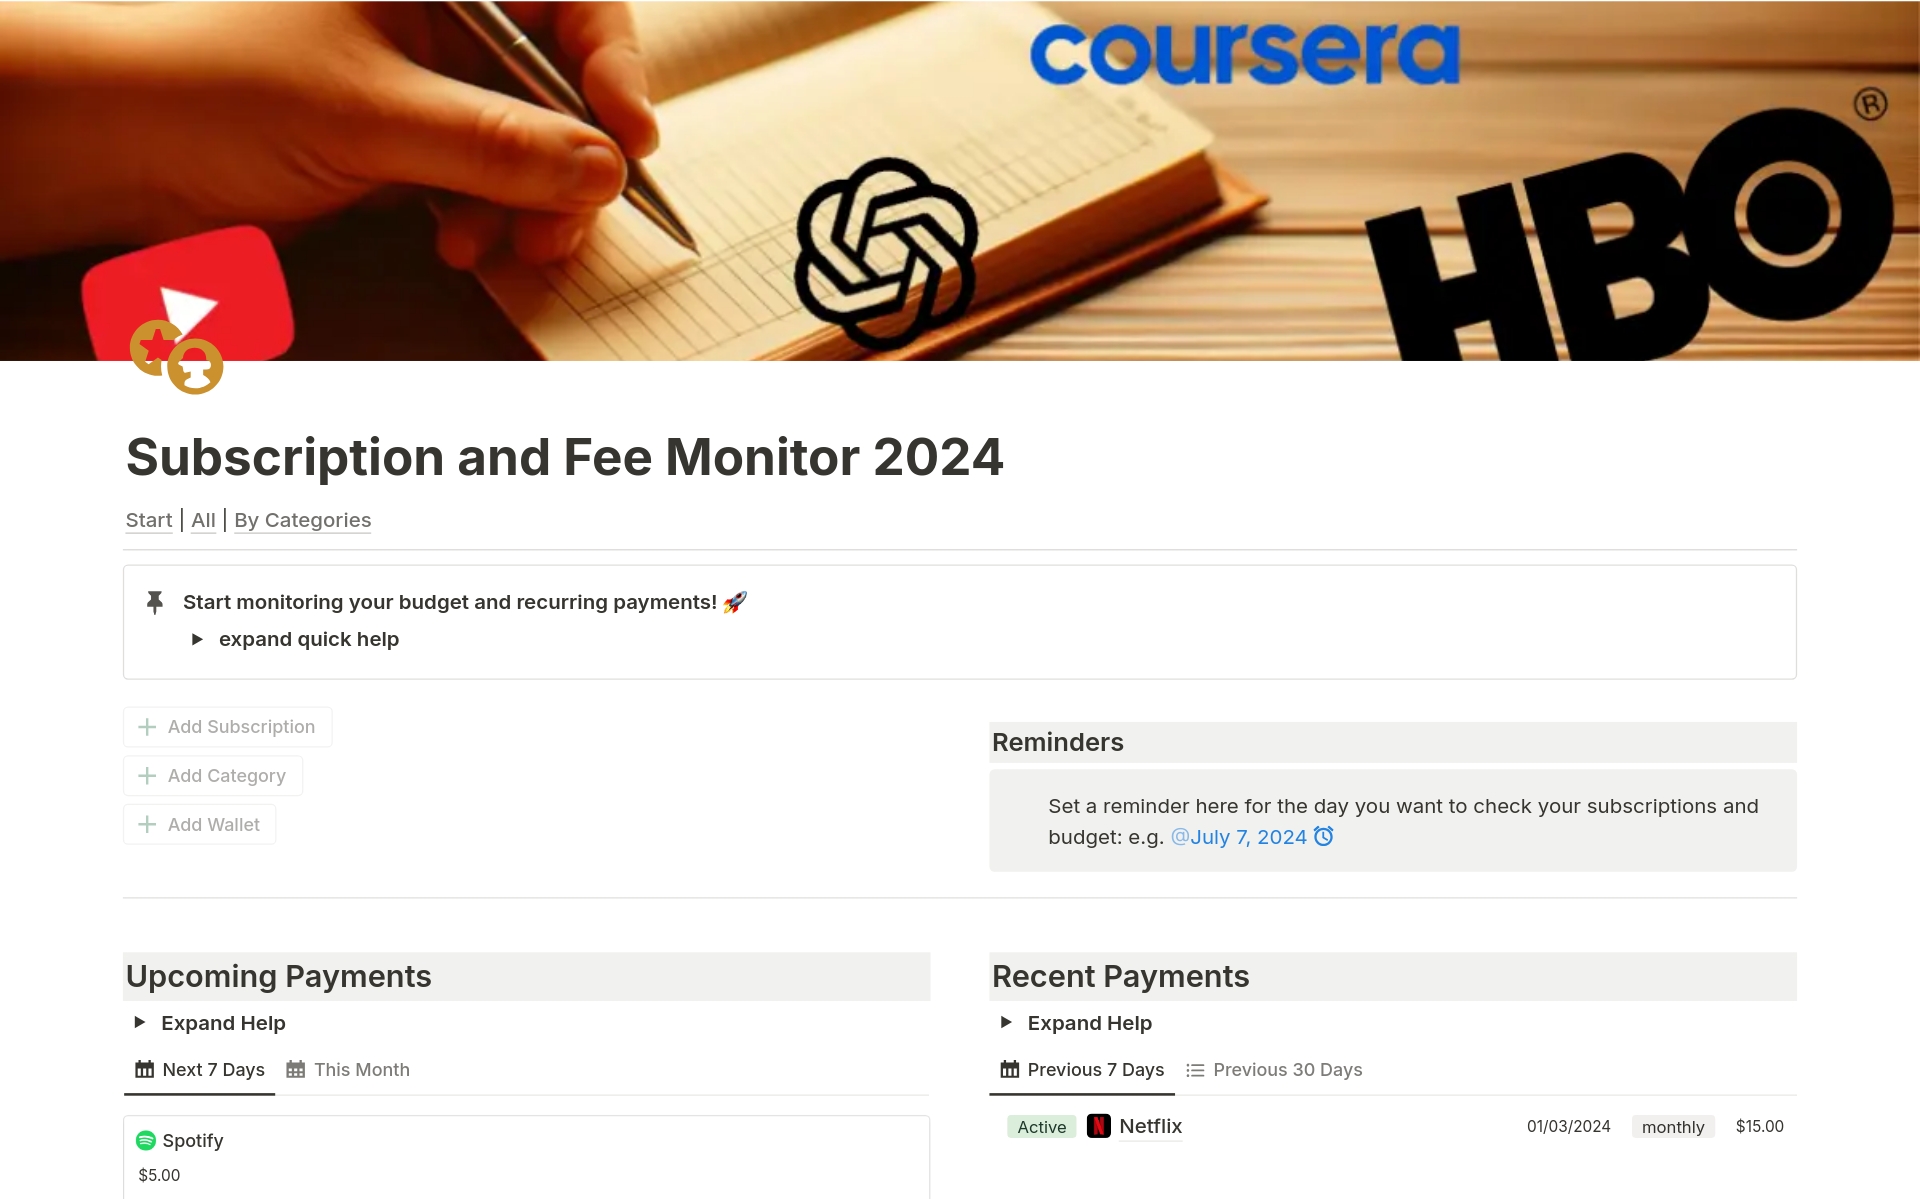 Subscription and Fee Monitor 2024 is your simple tool, designed to master your personal finances and subscriptions effortlessly. This free template is your step towards achieving control over your expenses, transforming financial uncertainty into certainty and peace of mind. ✨  